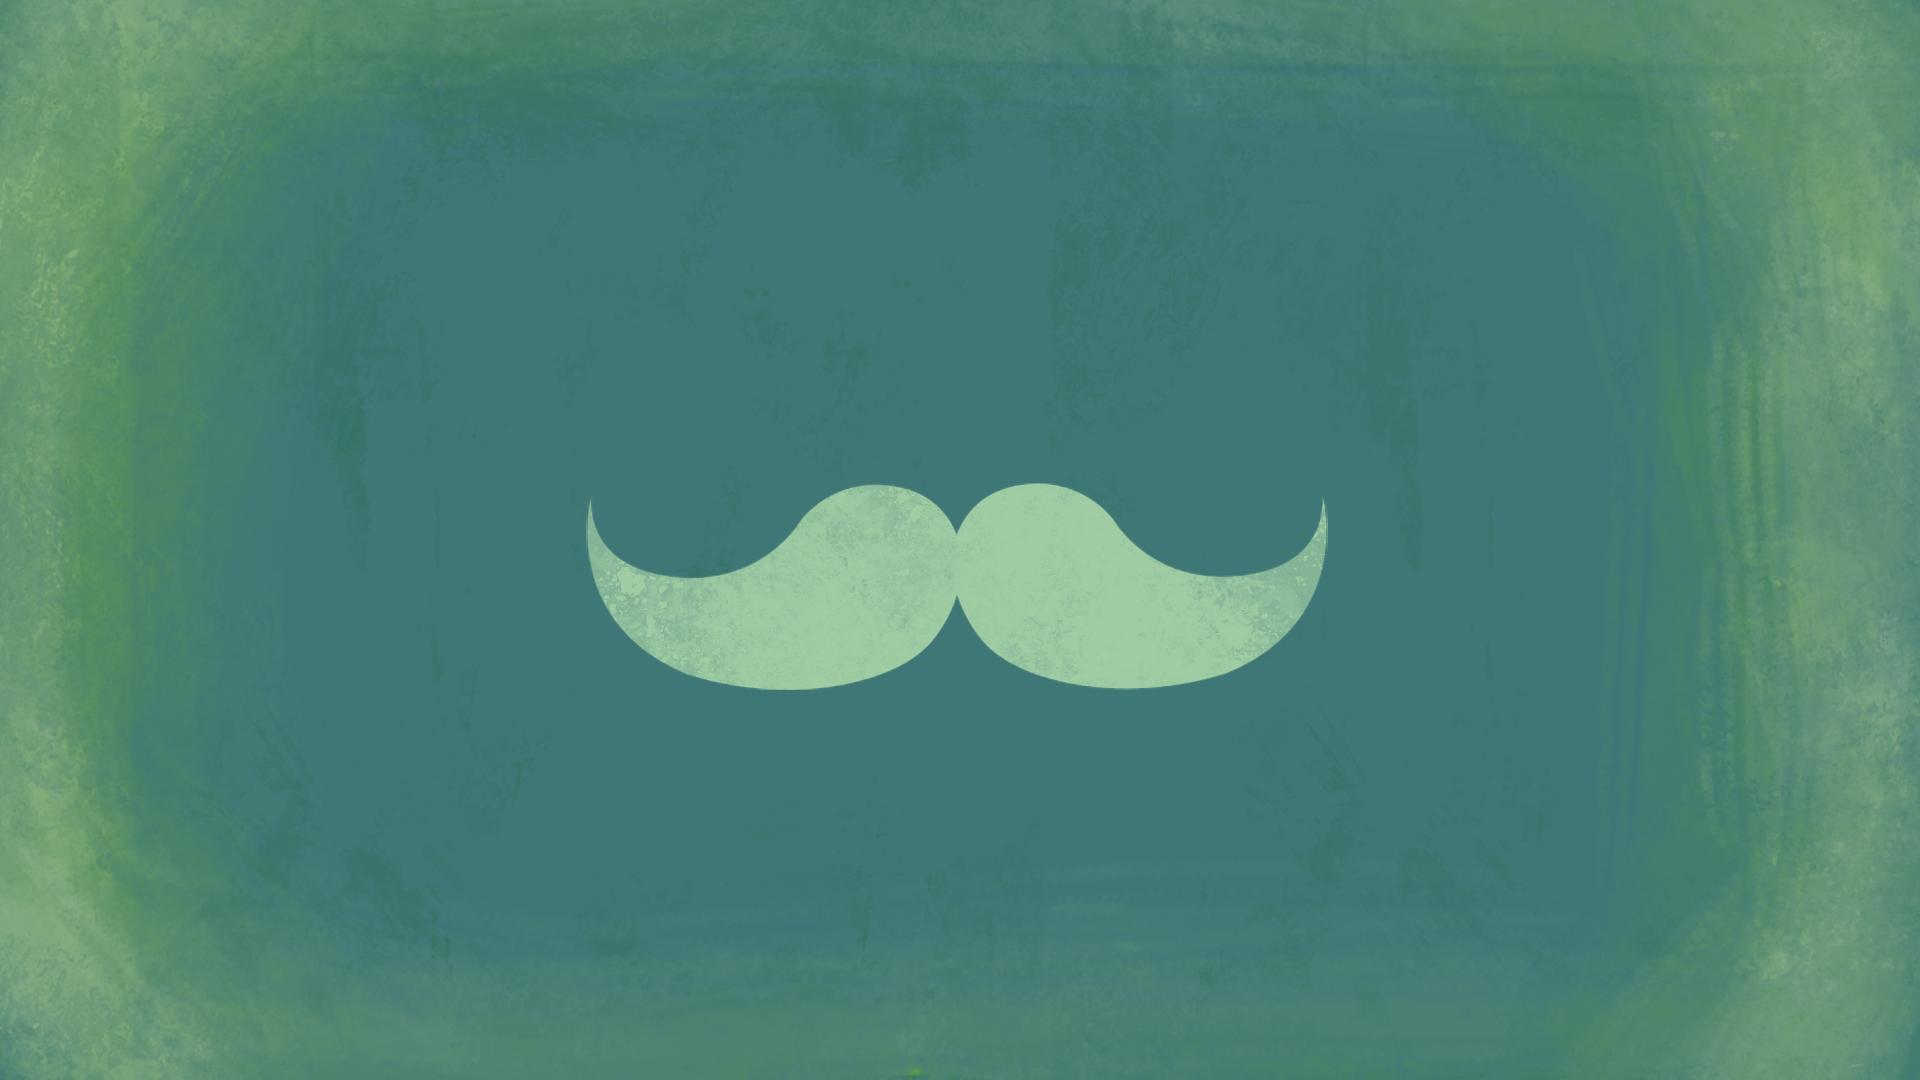 Icon for Marshal moustache